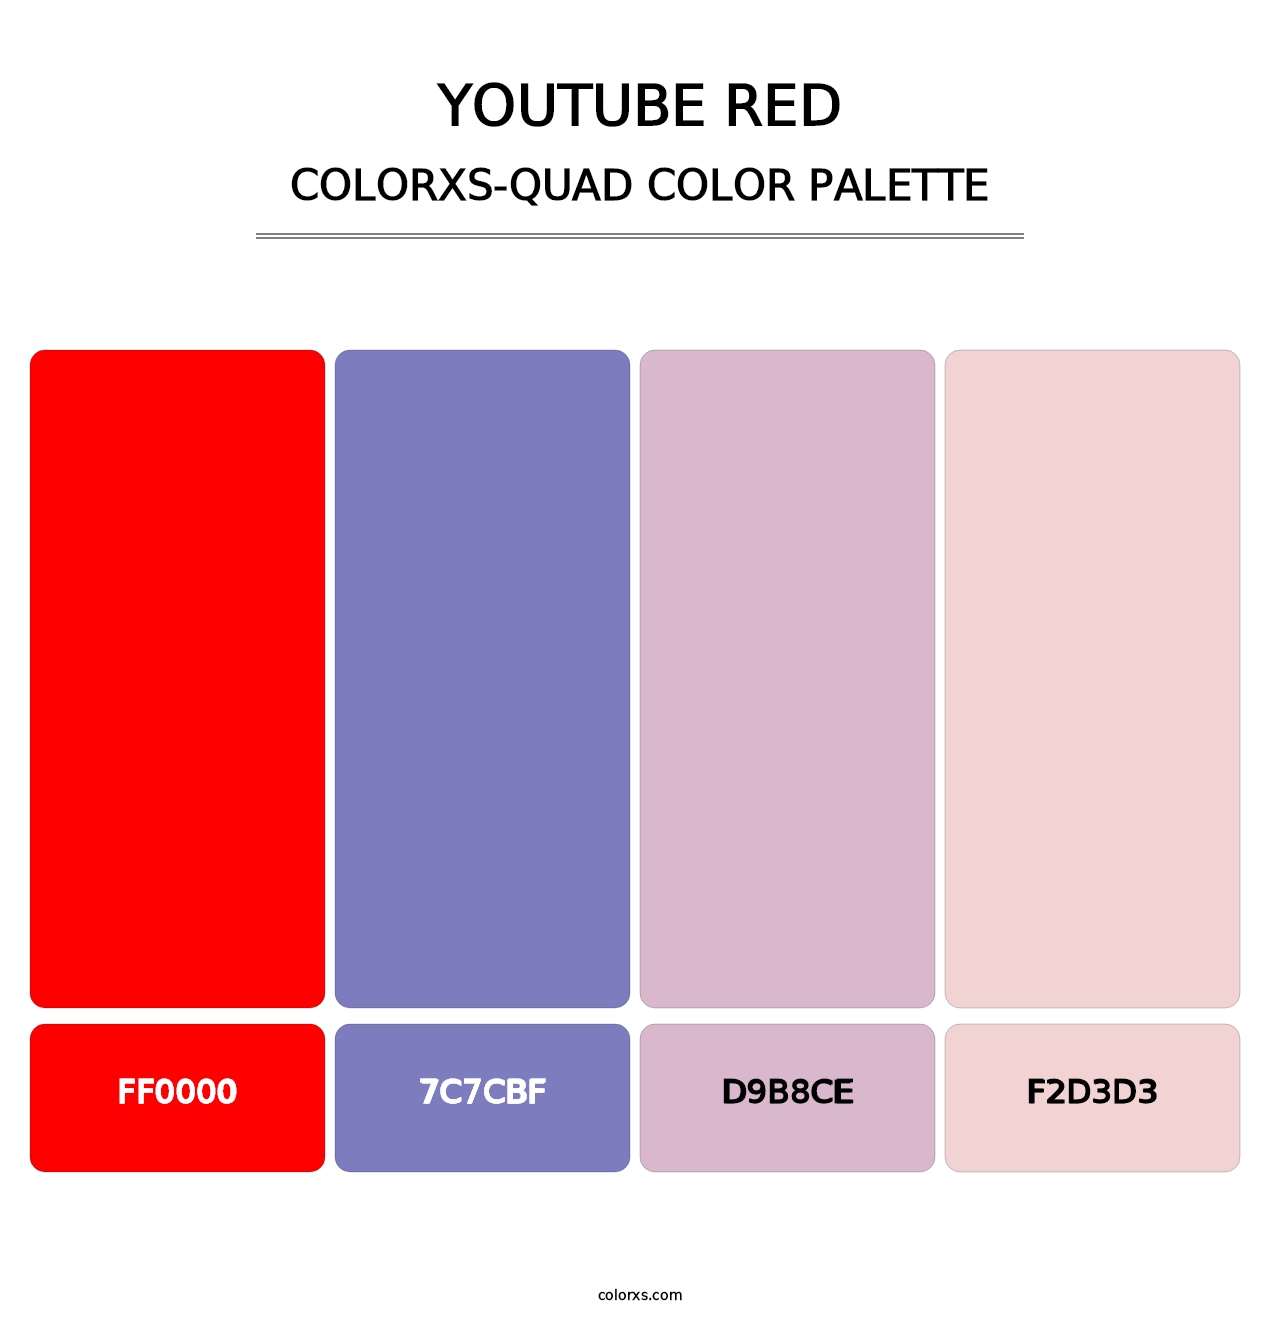 YouTube Red - Colorxs Quad Palette